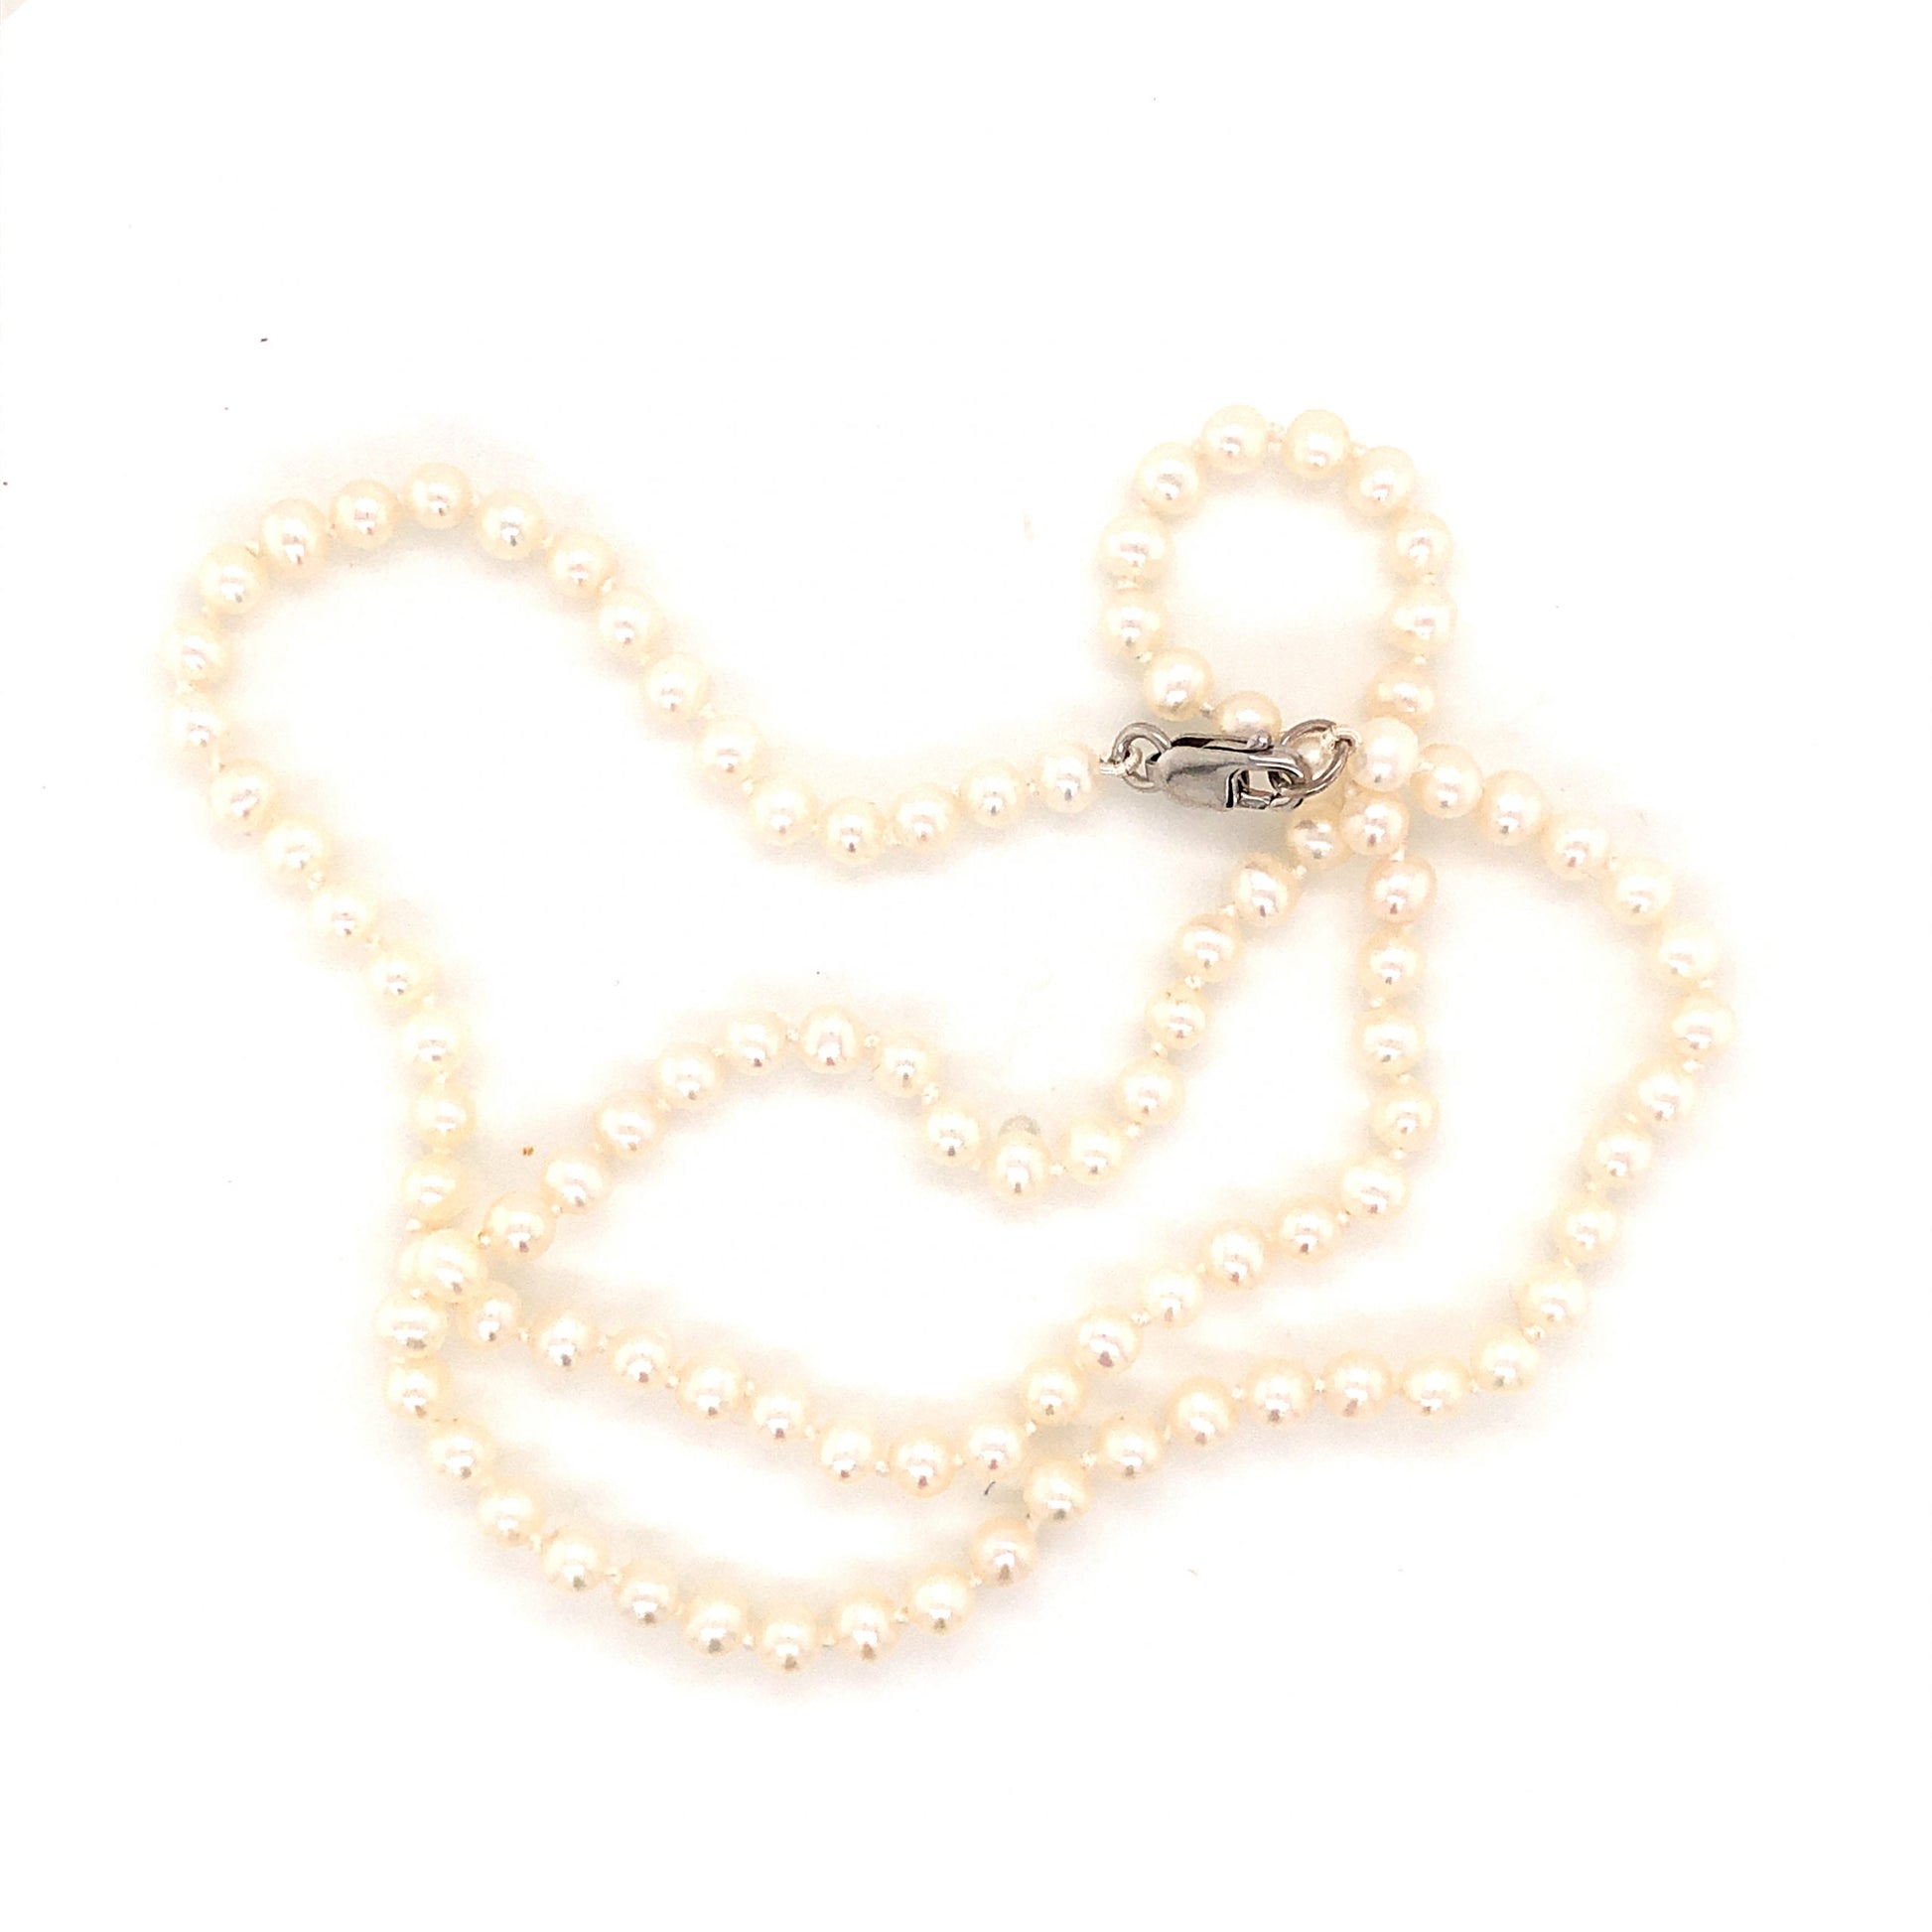 16 Inch Pearl Necklace w/ 14k White Gold ClaspComposition: 14 Karat White Gold Total Gram Weight: 6.3 g Inscription: 585
      